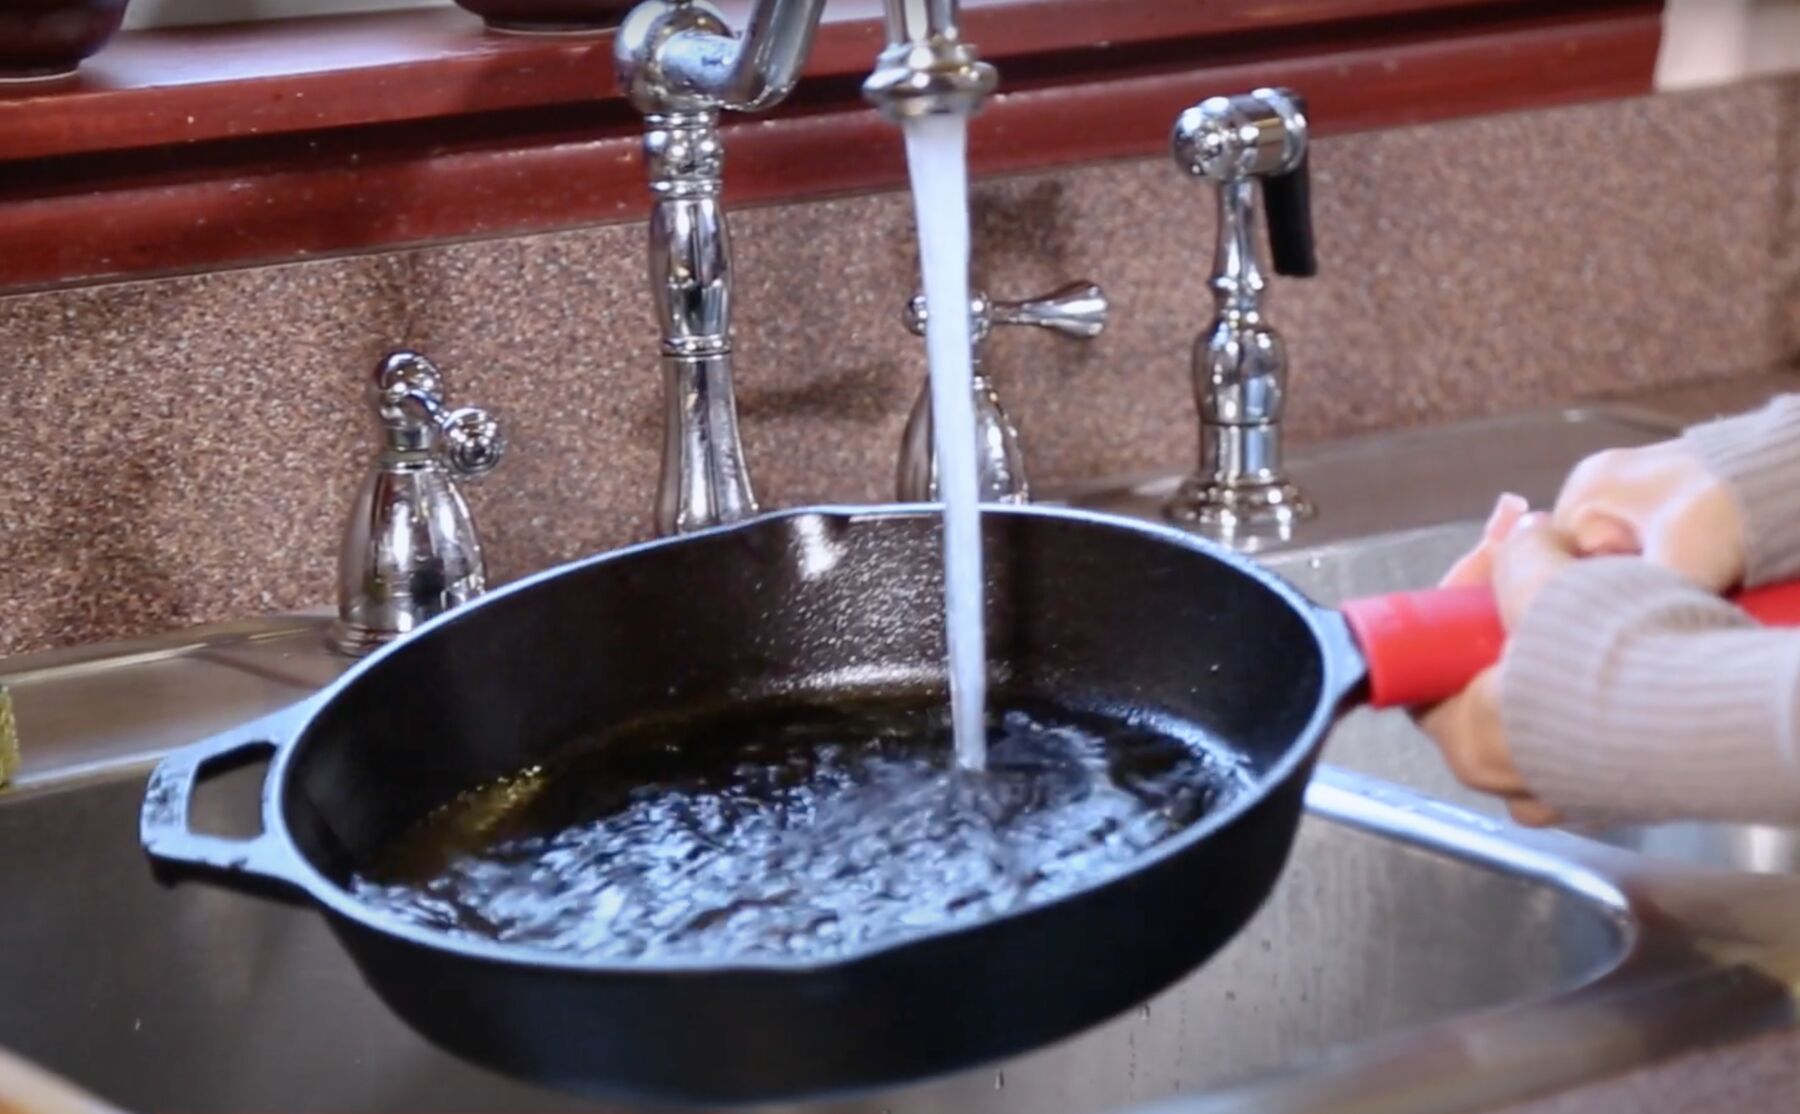 cleaning cast iron skillet in kitchen sink